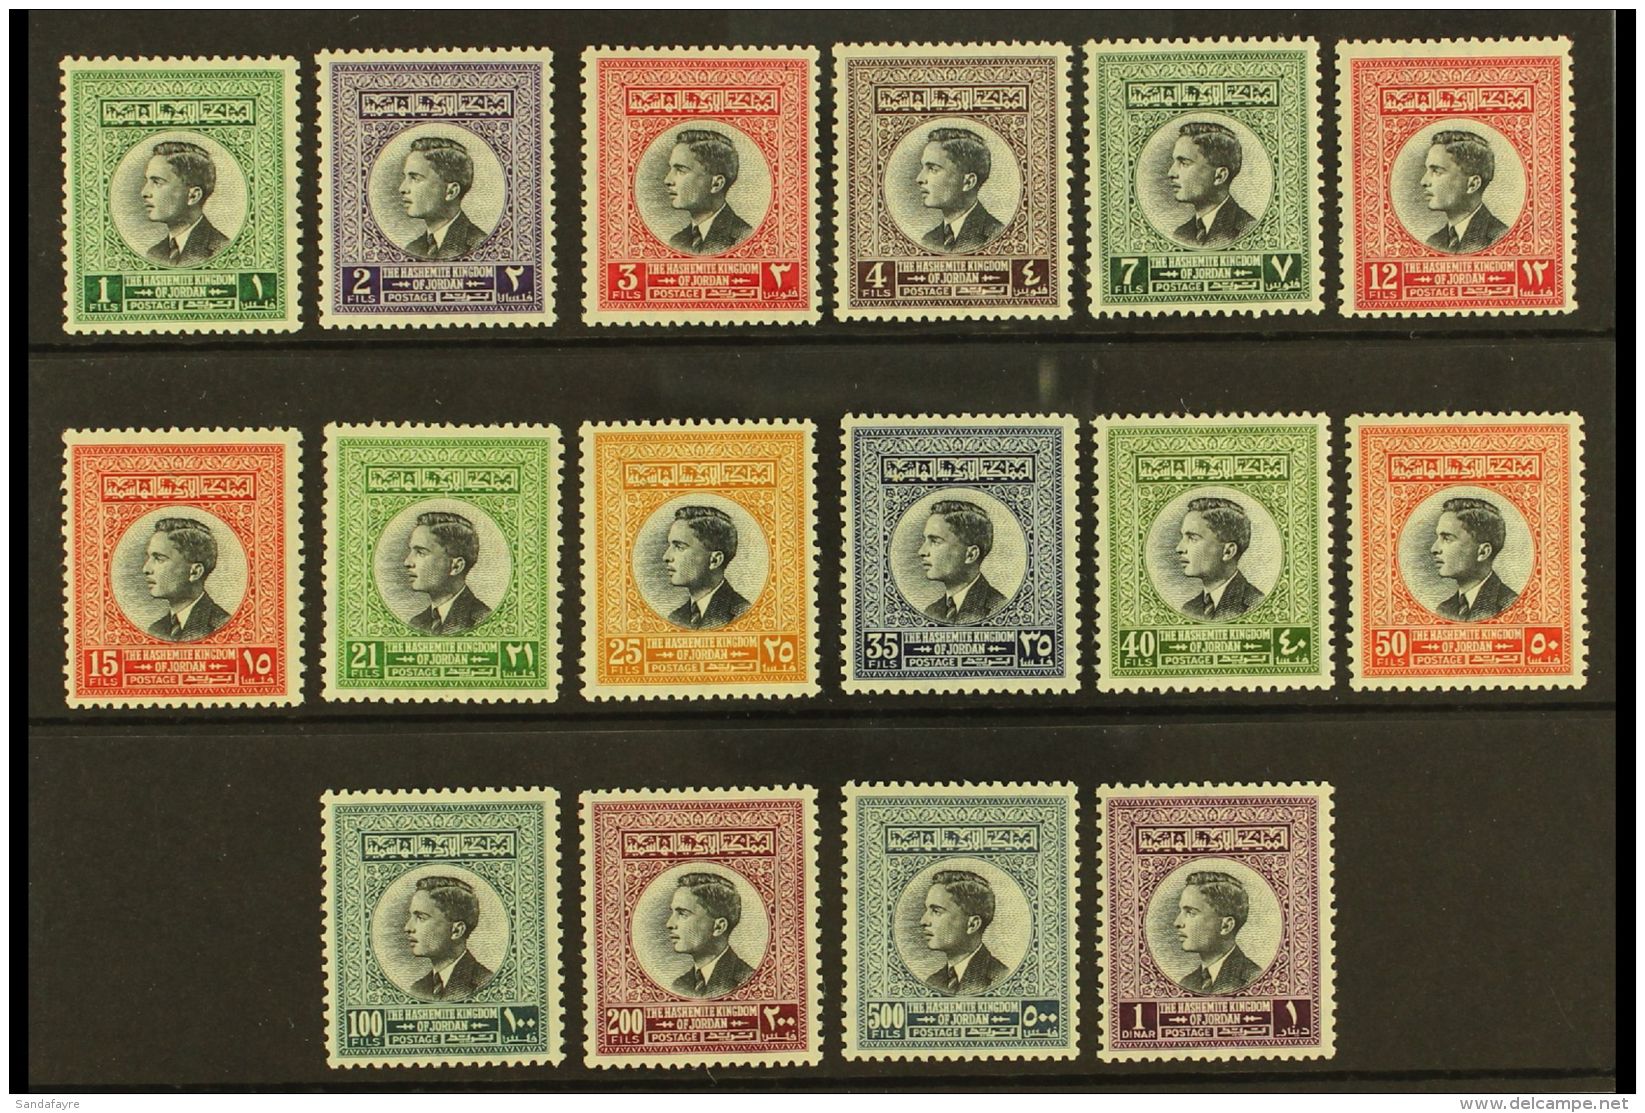 1959 King Hussein Complete Set, SG 480/95, Fine Never Hinged Mint, Very Fresh. (16 Stamps) For More Images, Please... - Jordanien